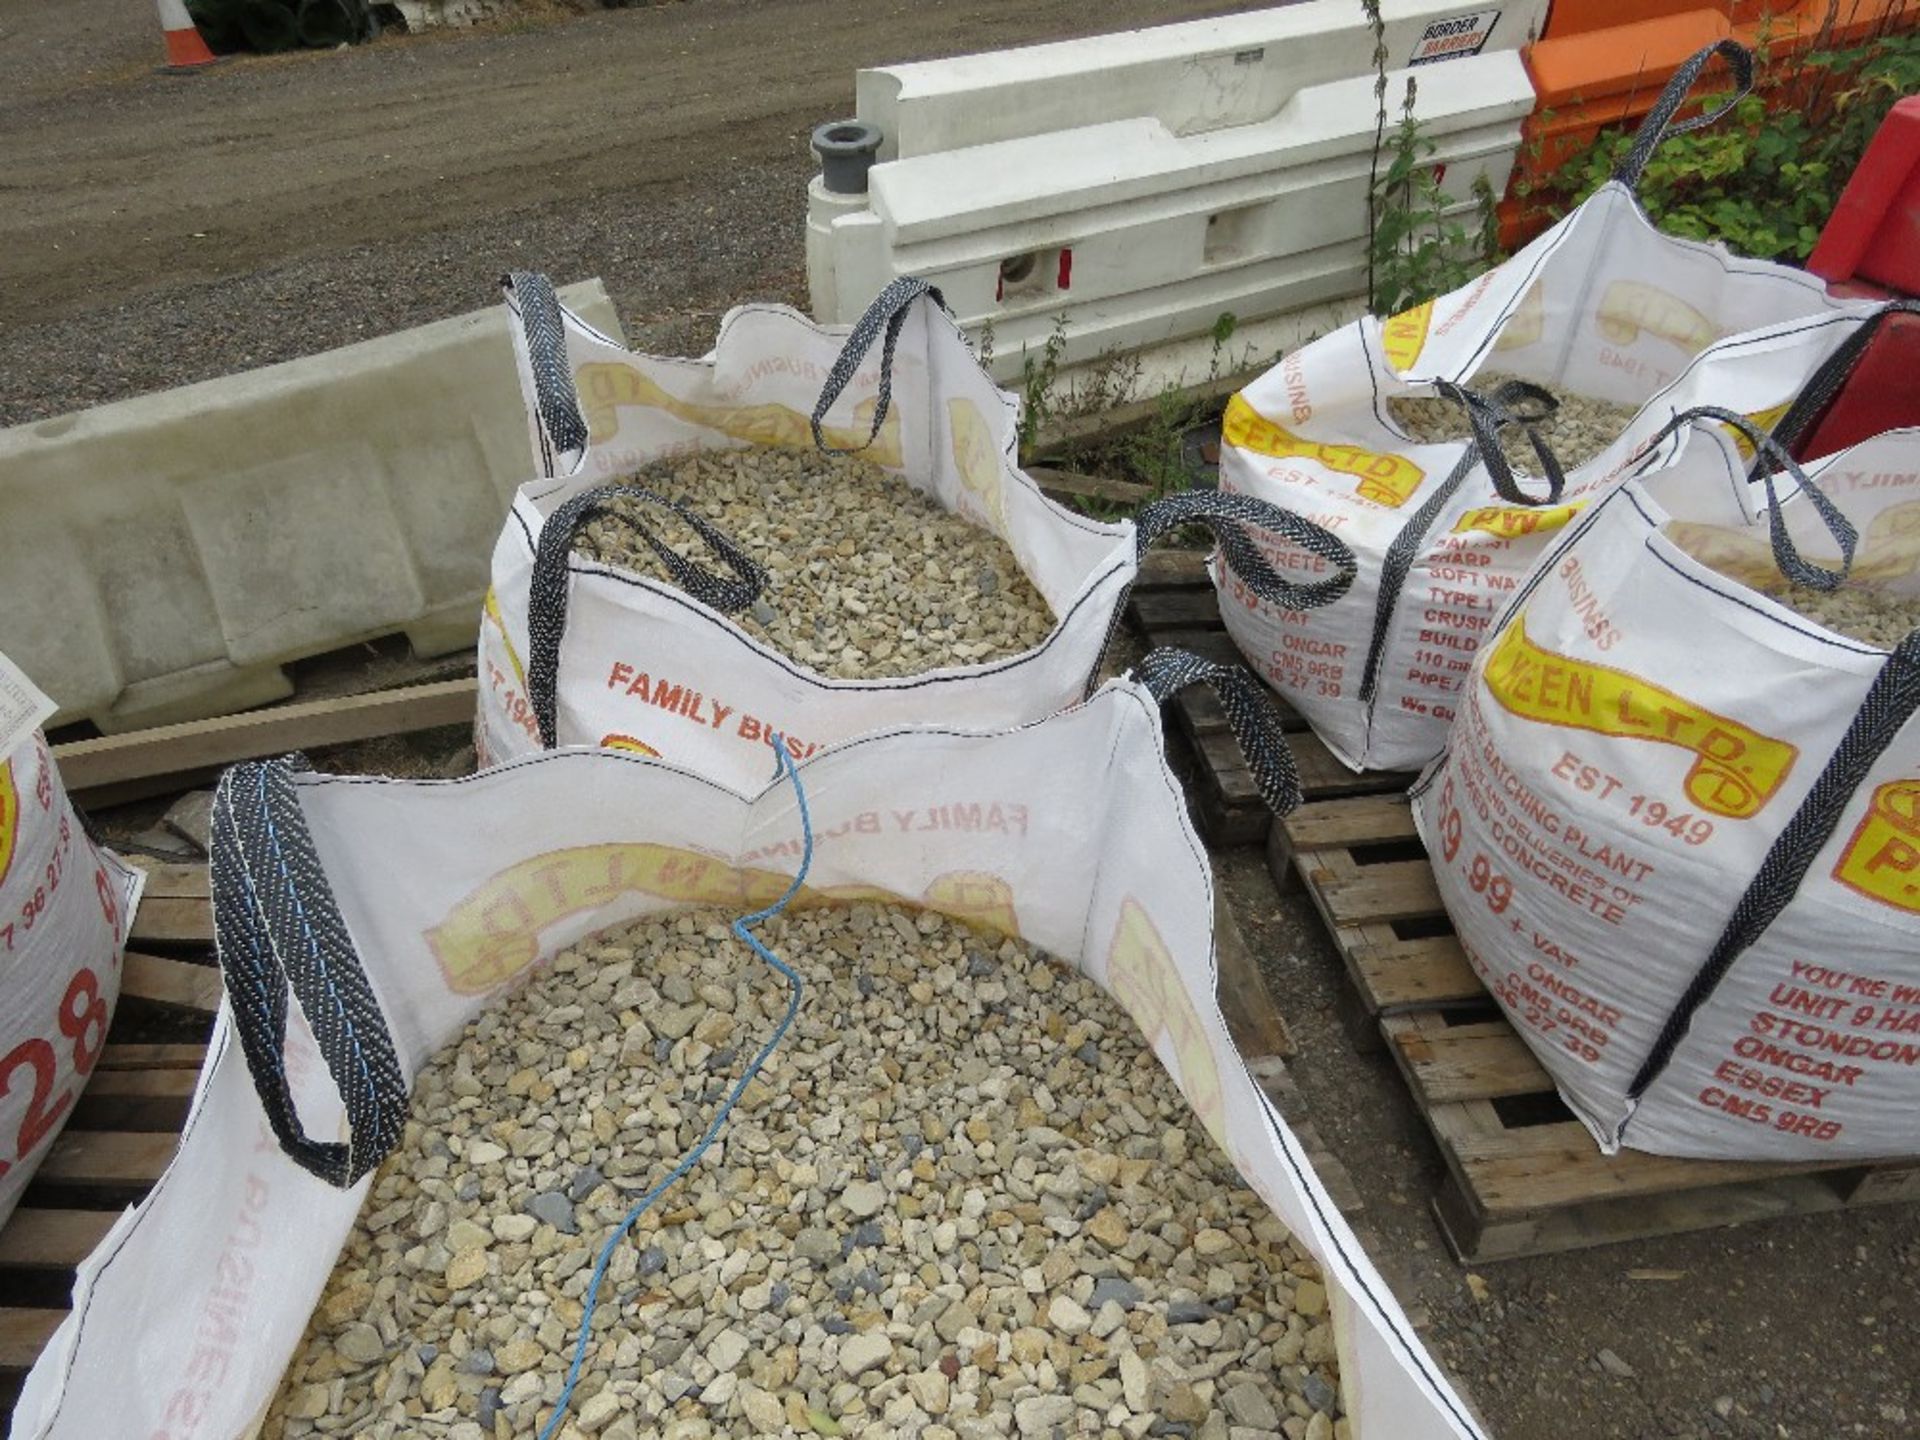 2 X BULK BAGS CONTAINING COTSWOLD GOLD STONE CHIPPINGS WITH BLACK ICE CHIPPINGS ADDED, 20-10MM SPECI